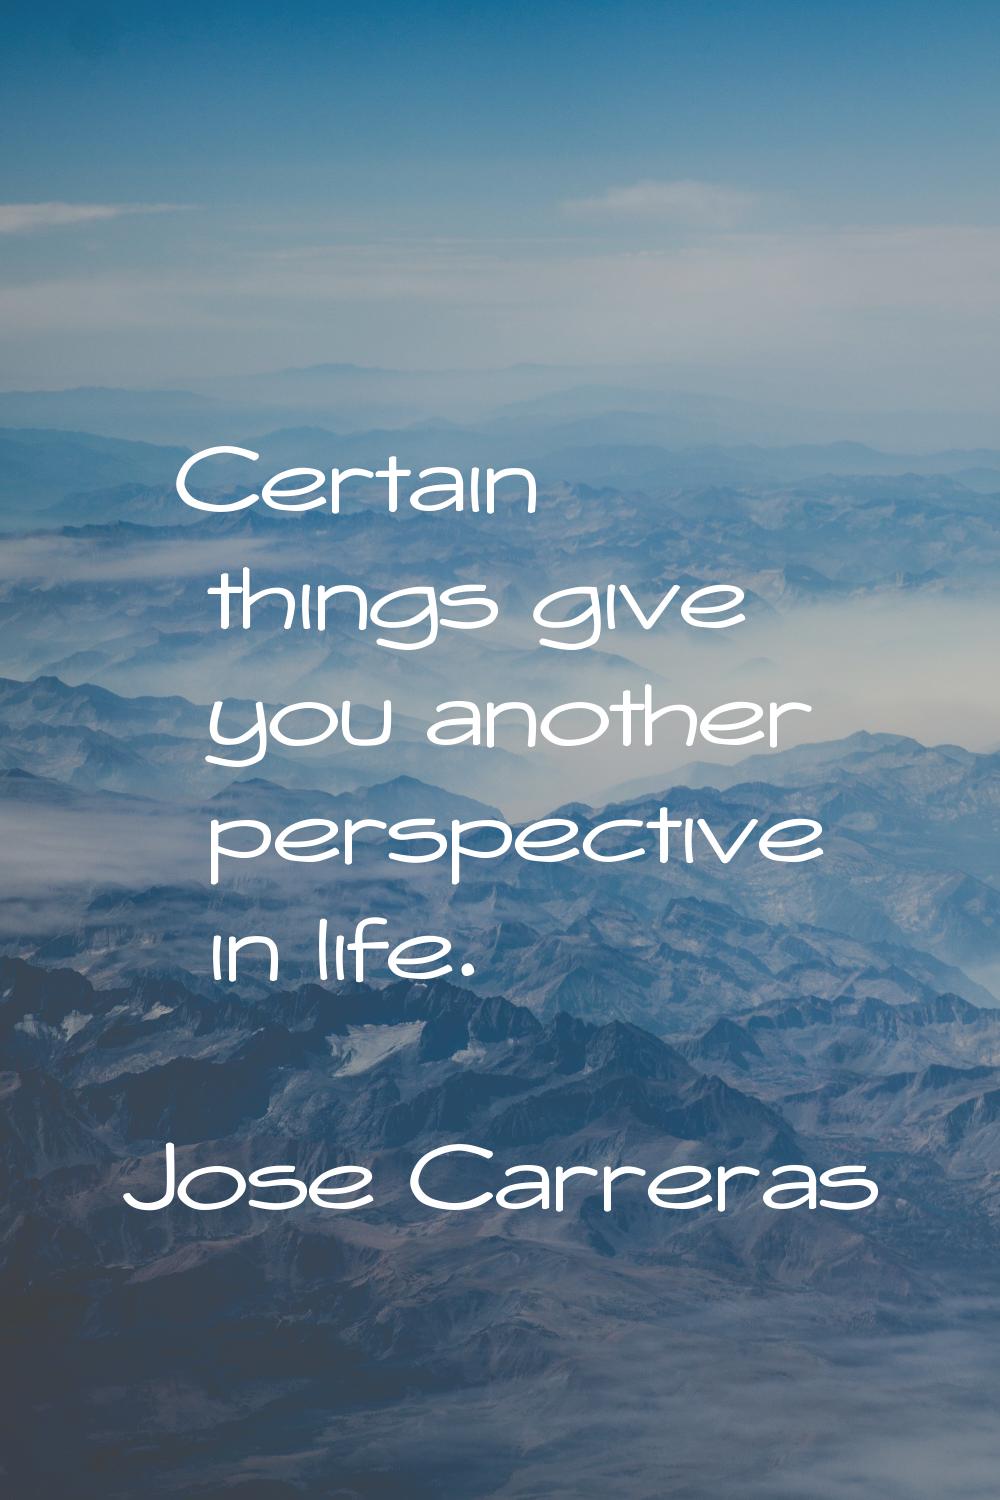 Certain things give you another perspective in life.